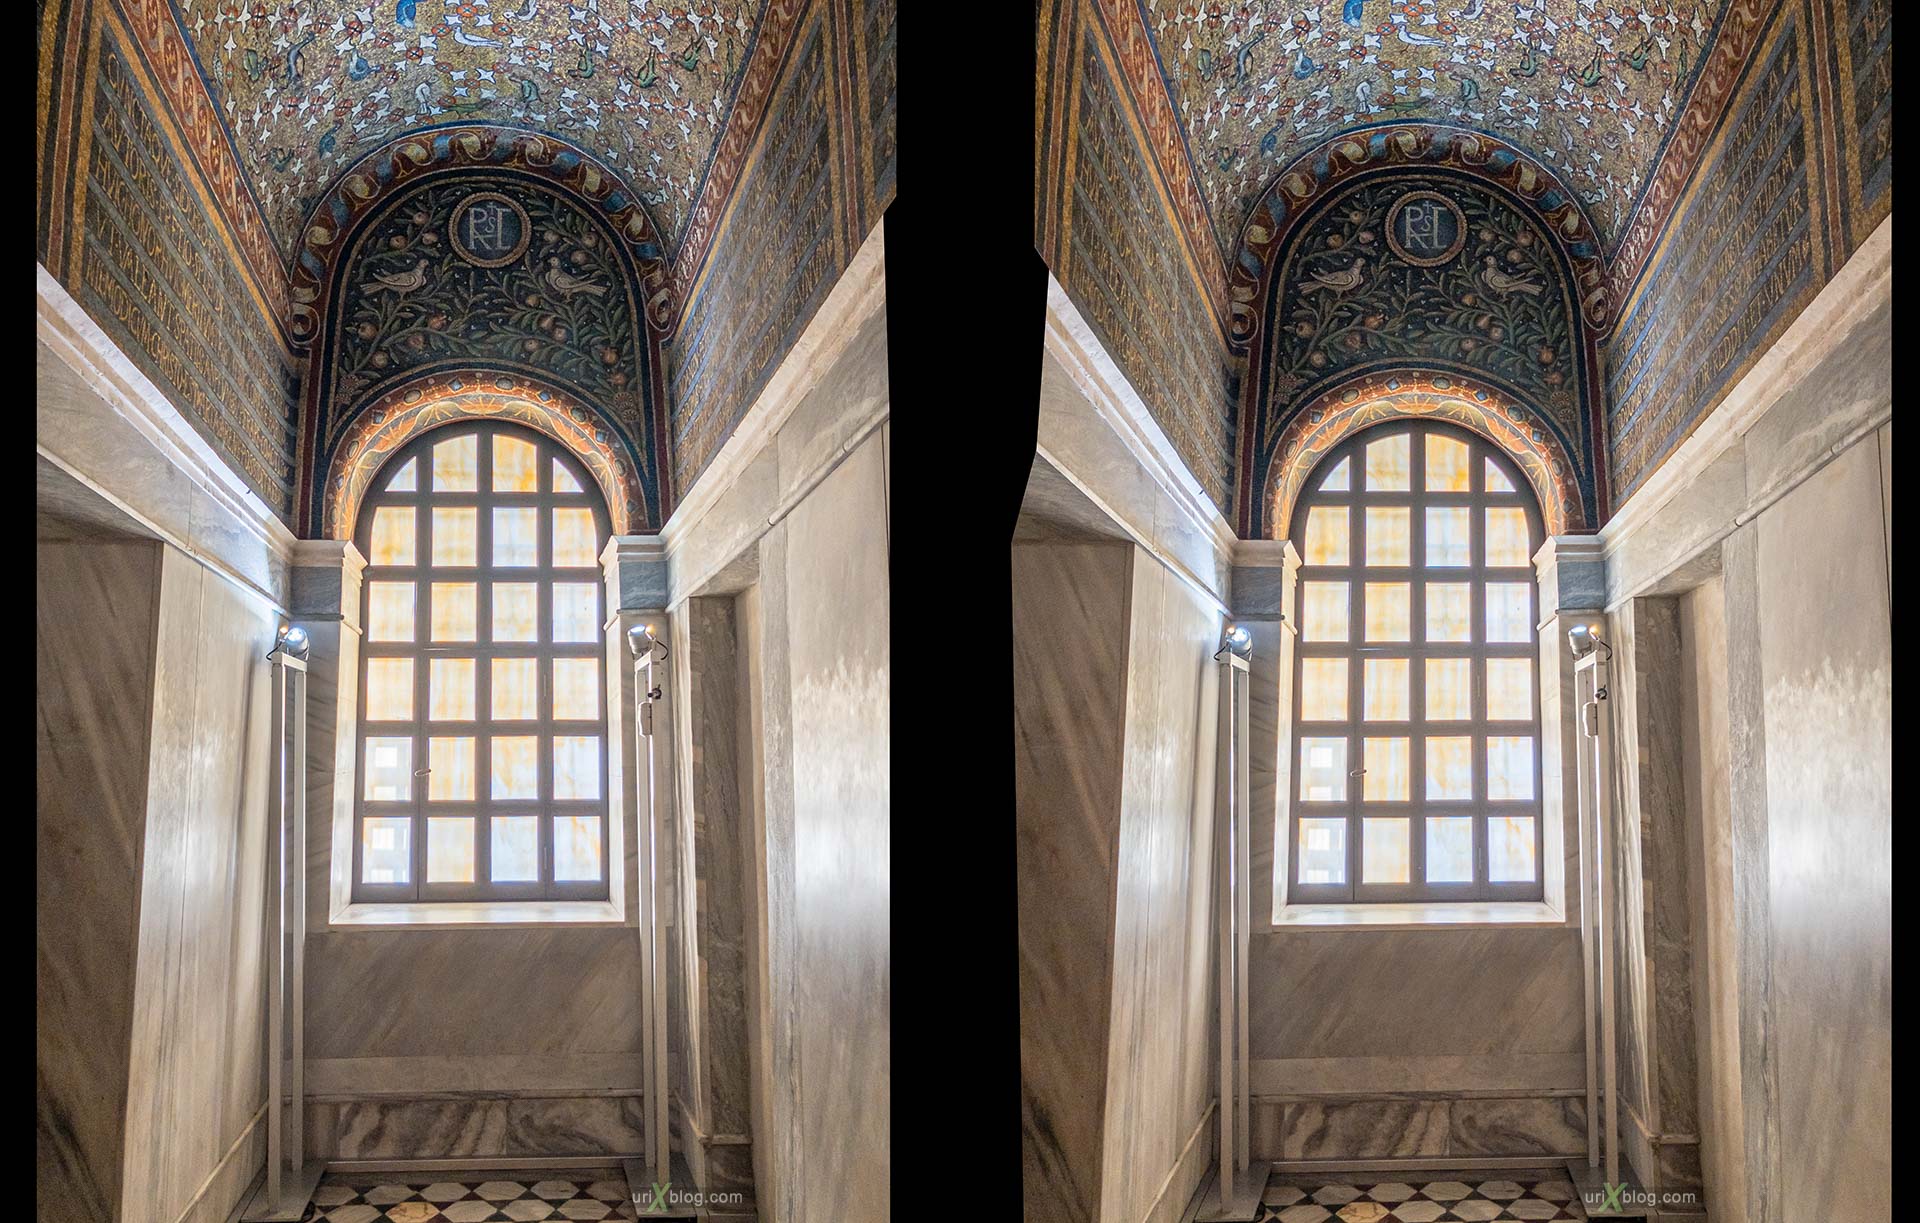 Archiepiscopal Chapel, mosaic, Ravenna, Italy, 3D, stereo pair, cross-eyed, crossview, cross view stereo pair, stereoscopic